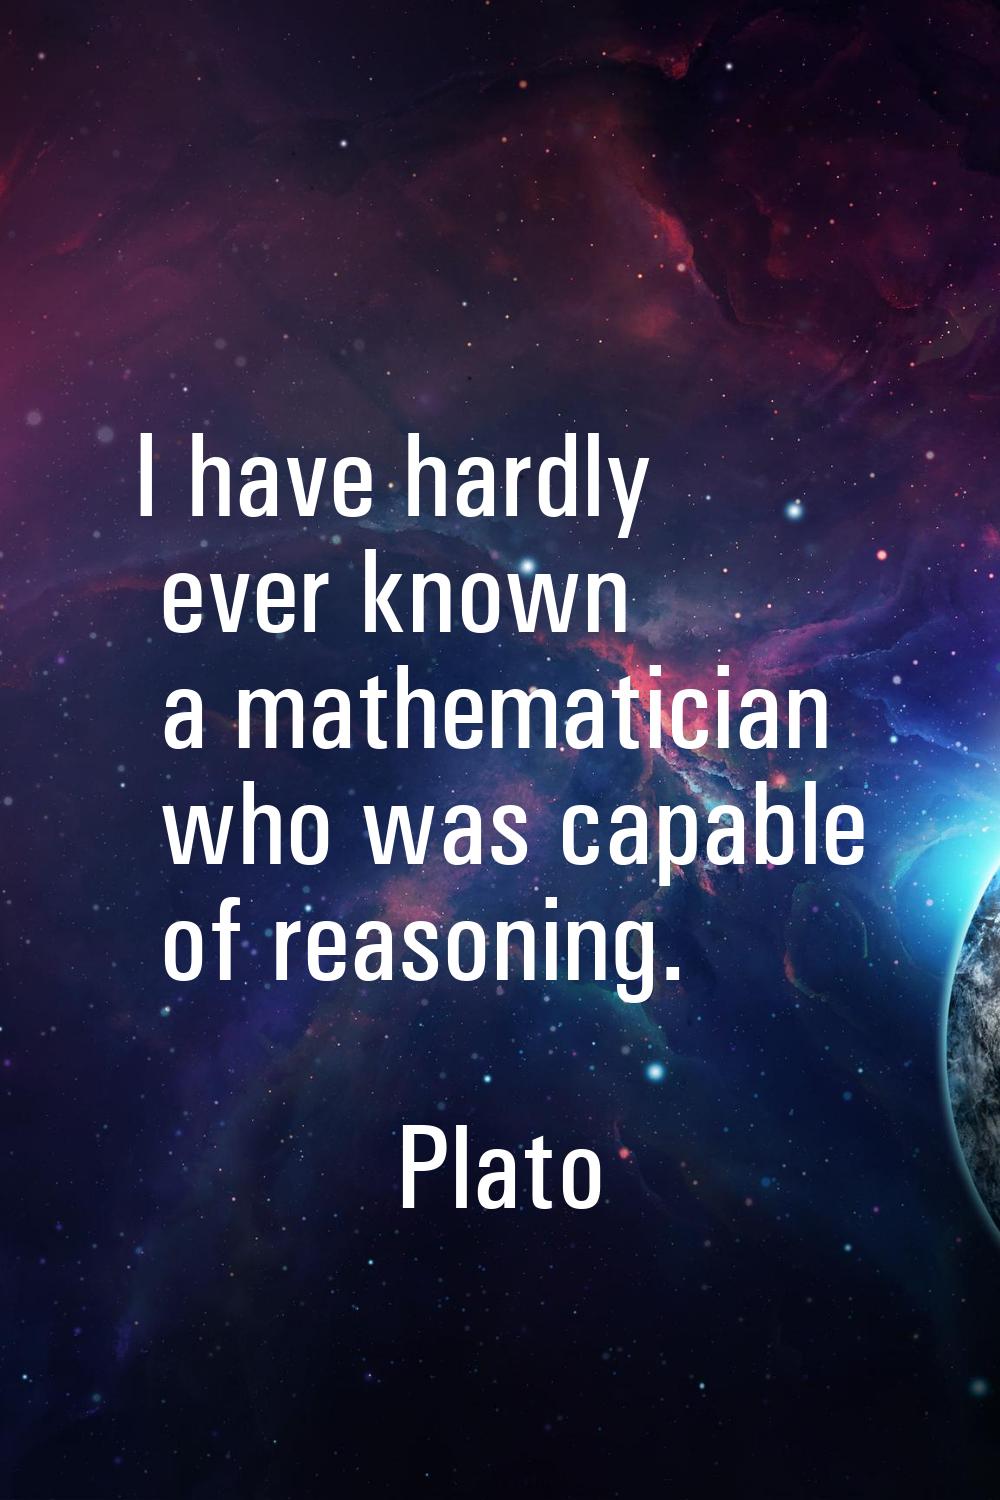 I have hardly ever known a mathematician who was capable of reasoning.